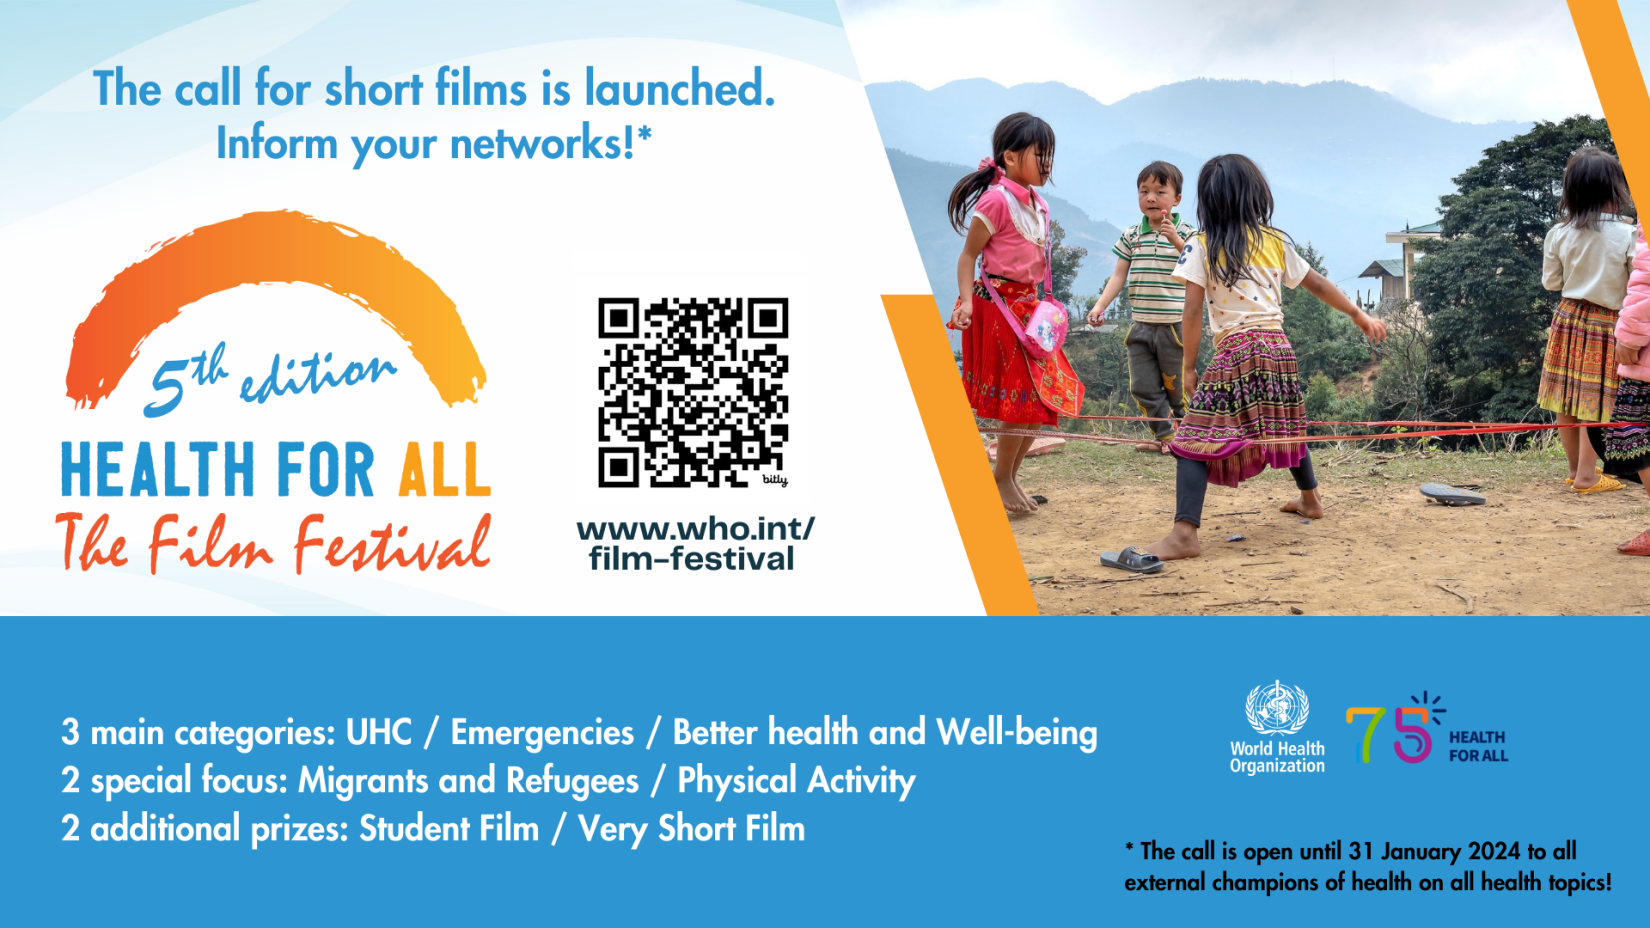 Launch of the 5th call for short films by the Health for All Film Festival!